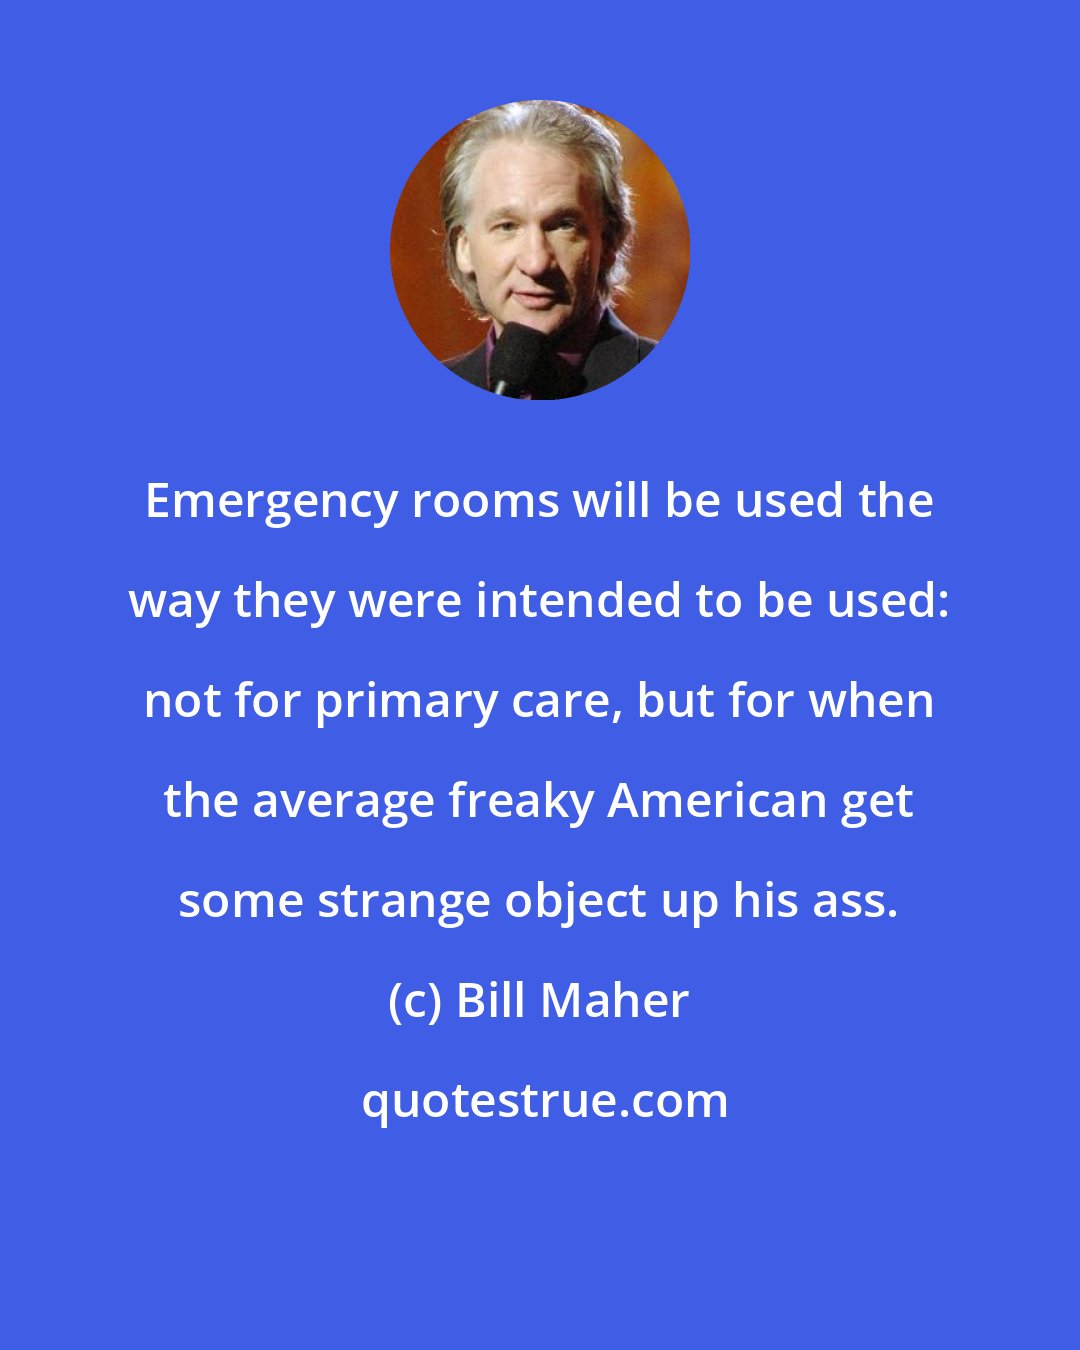 Bill Maher: Emergency rooms will be used the way they were intended to be used: not for primary care, but for when the average freaky American get some strange object up his ass.